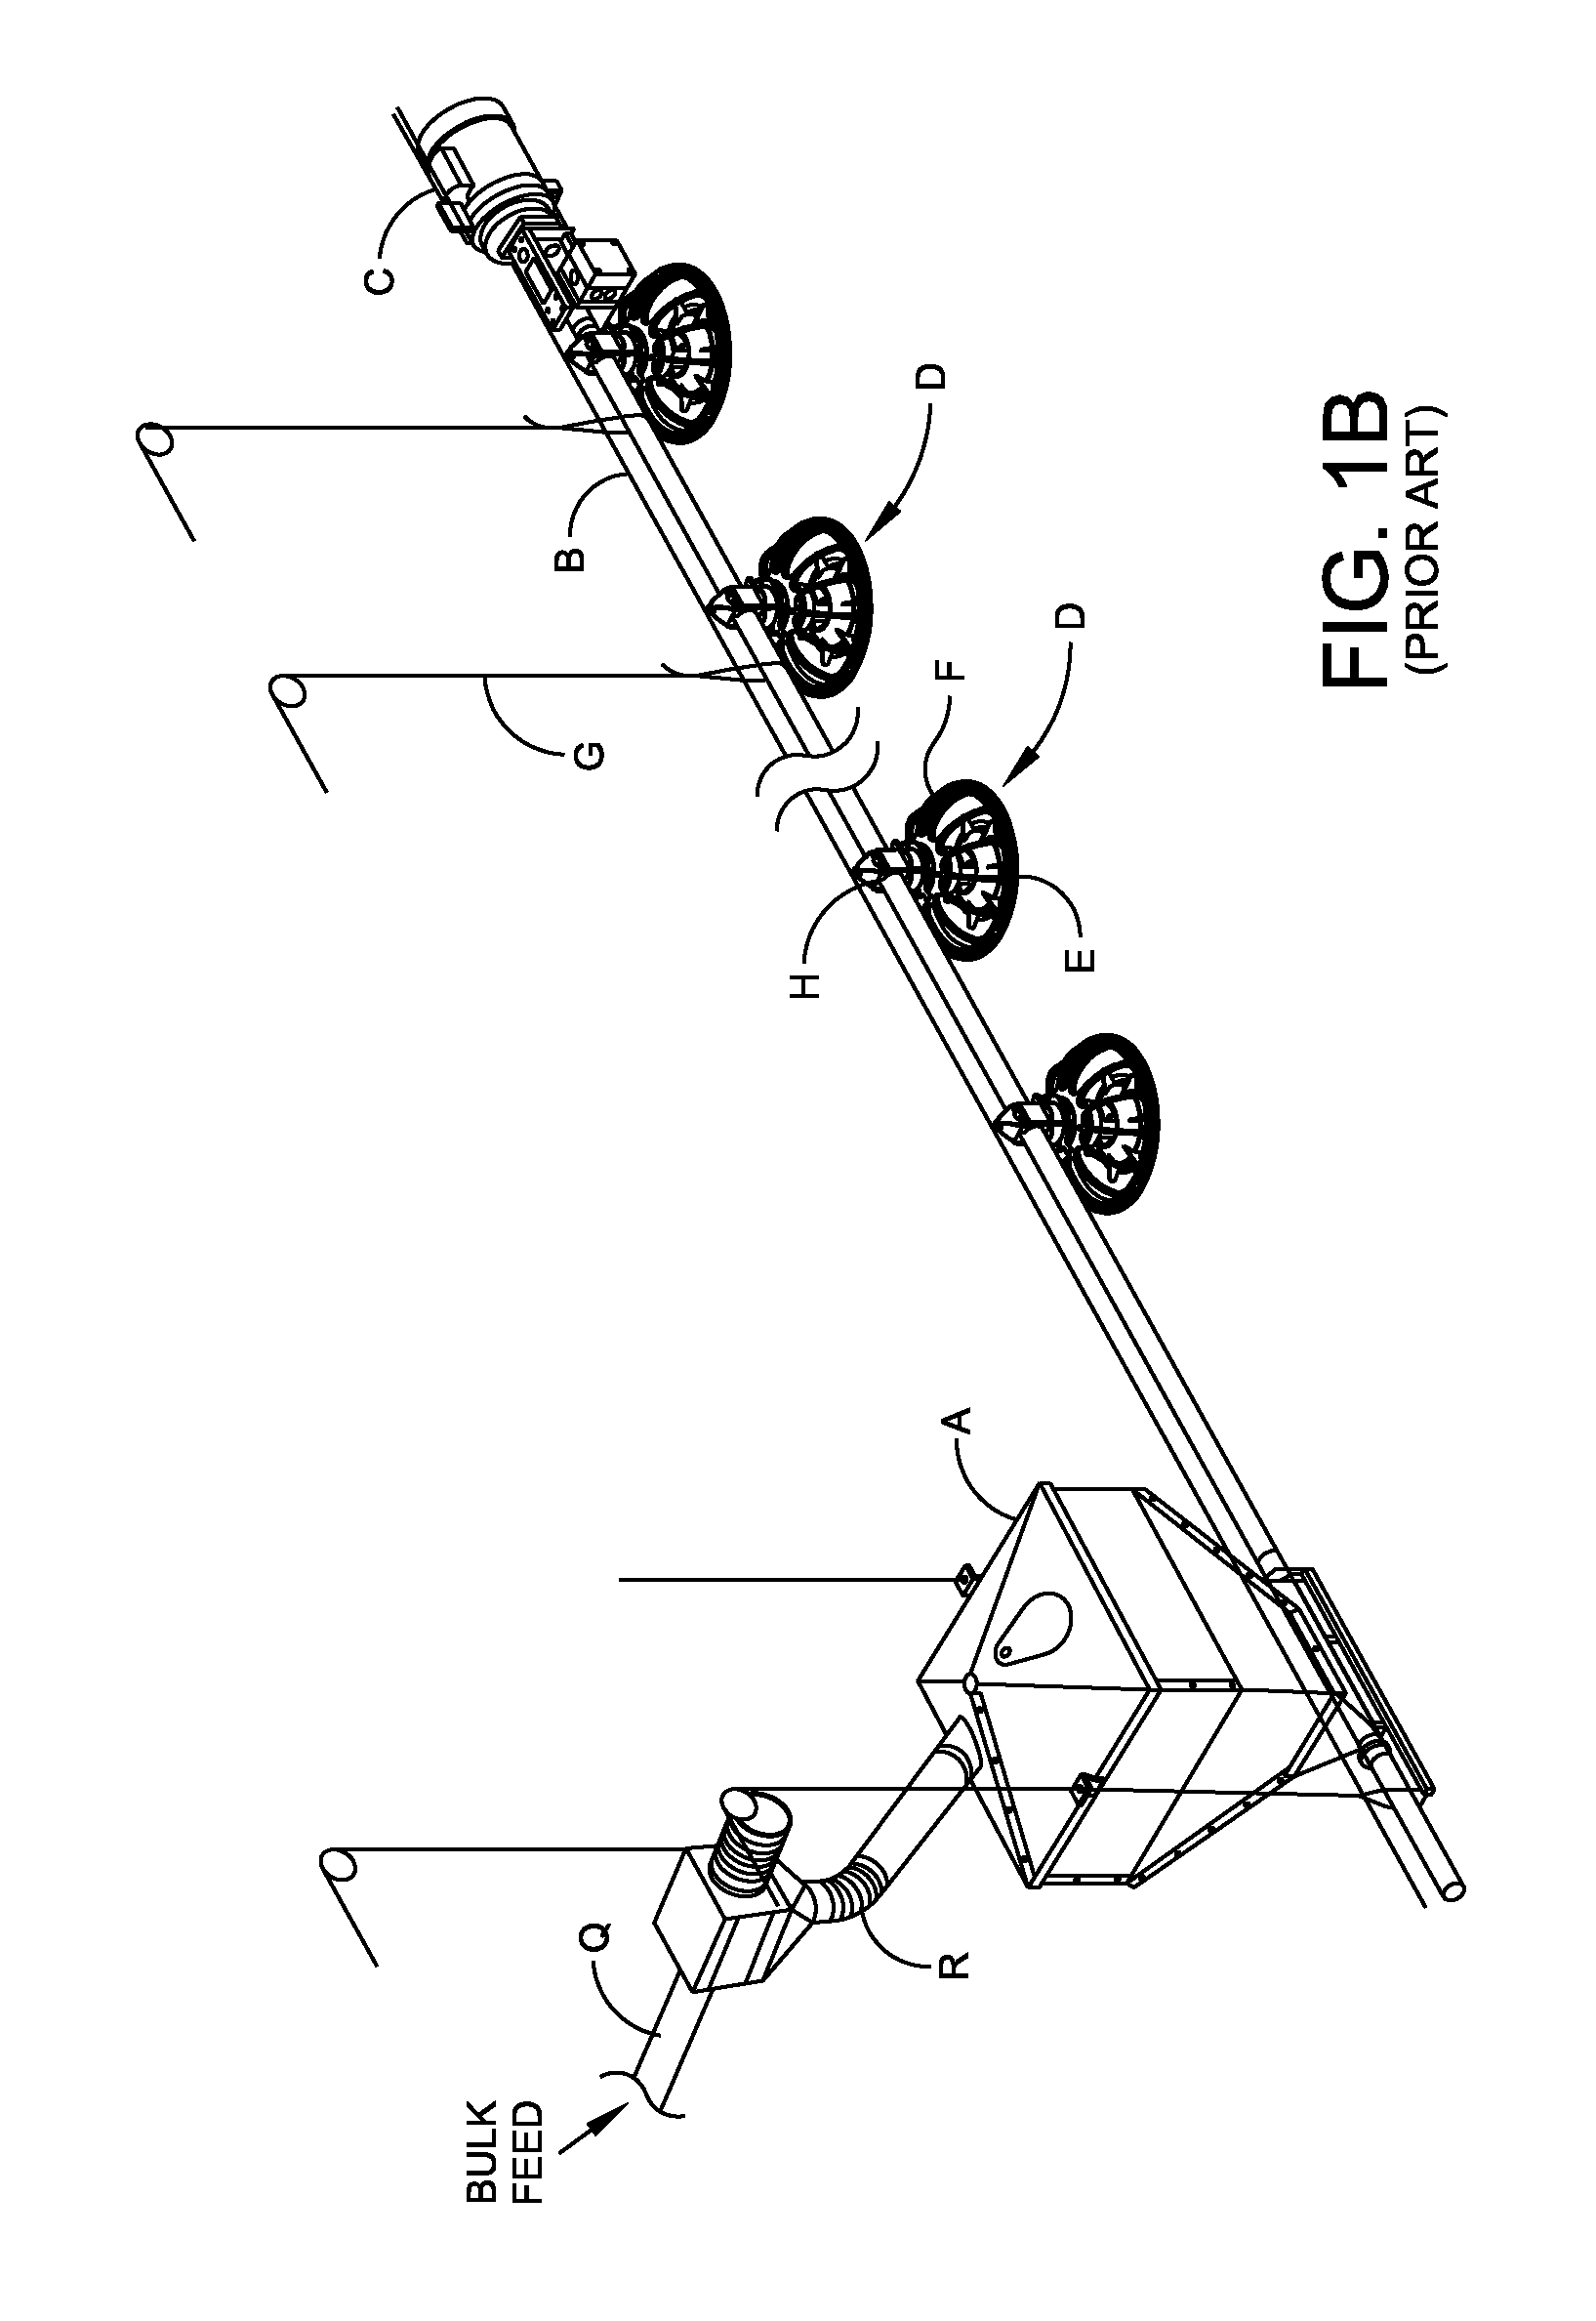 Poultry feeder with beak grooming device